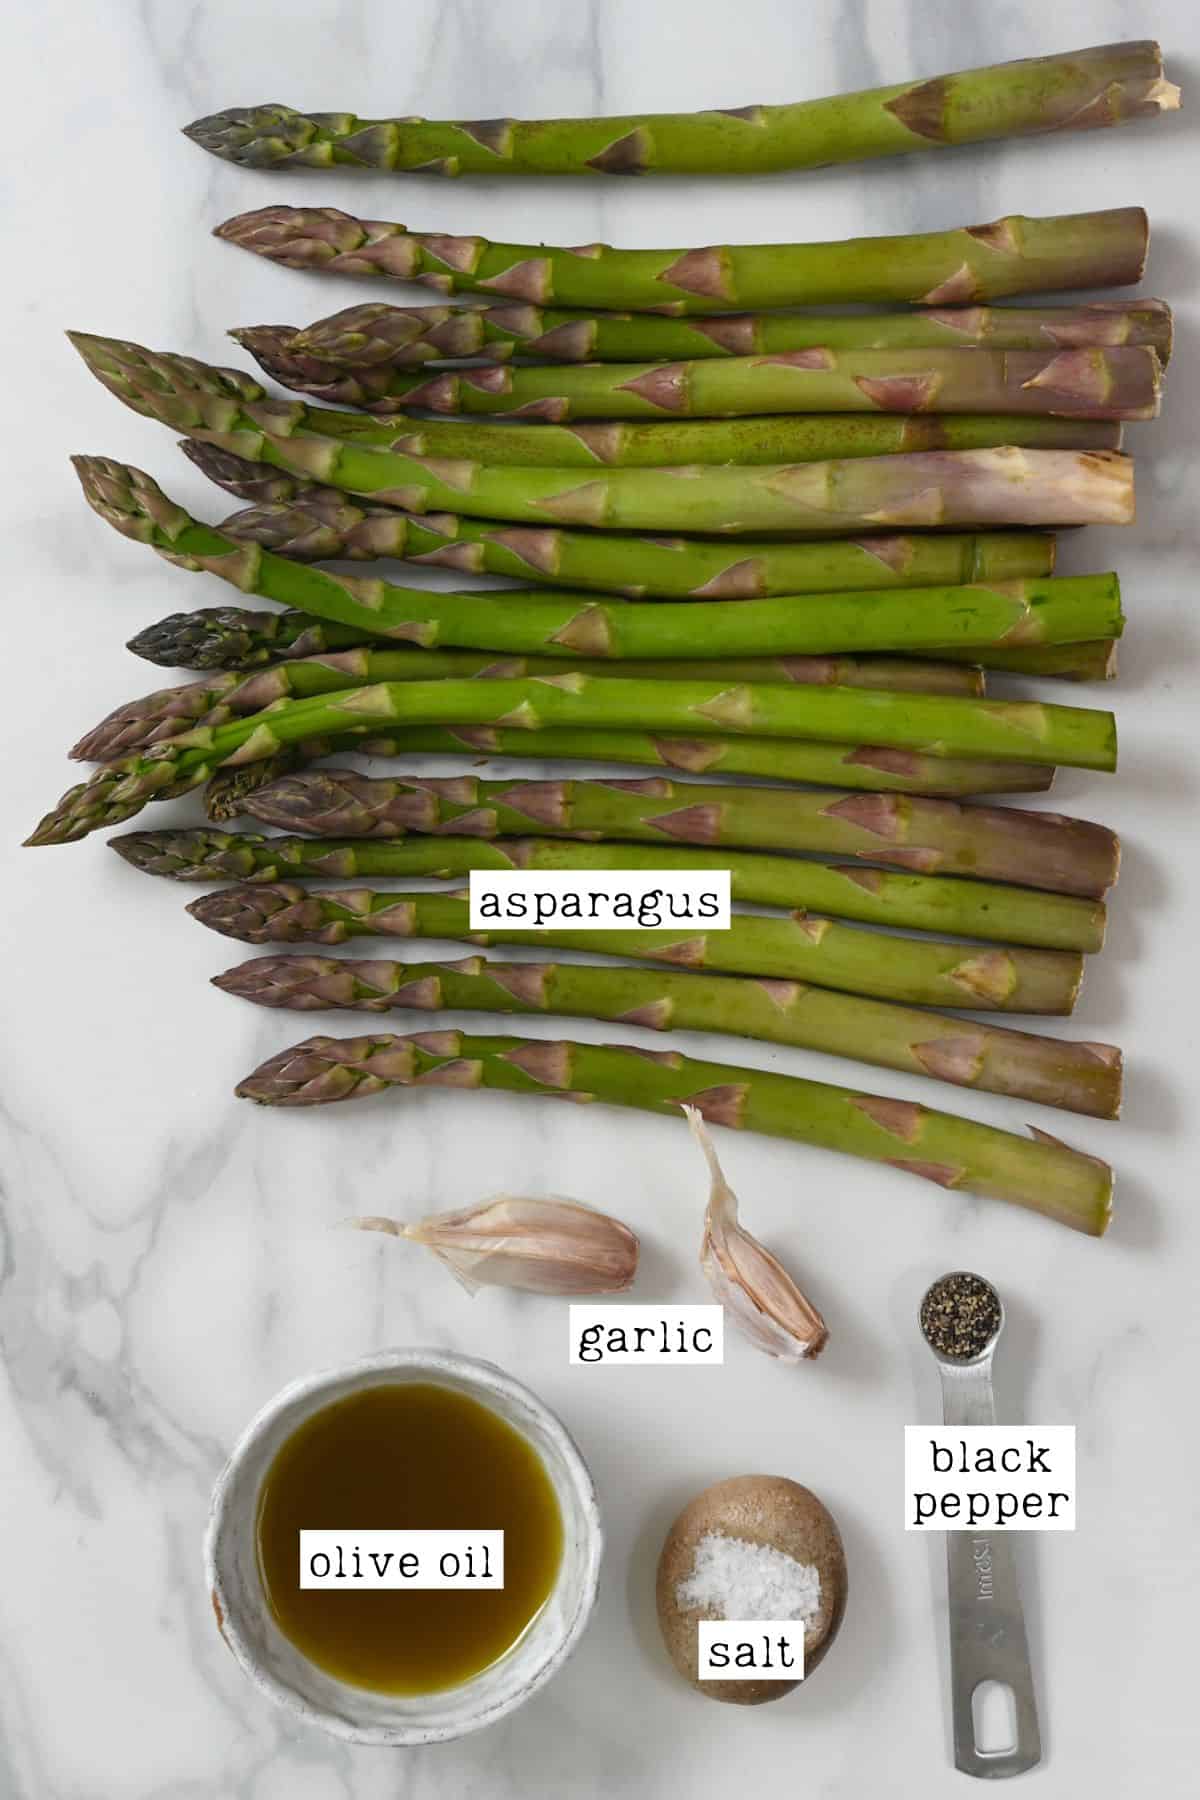 Ingredients for oven roasted asparagus